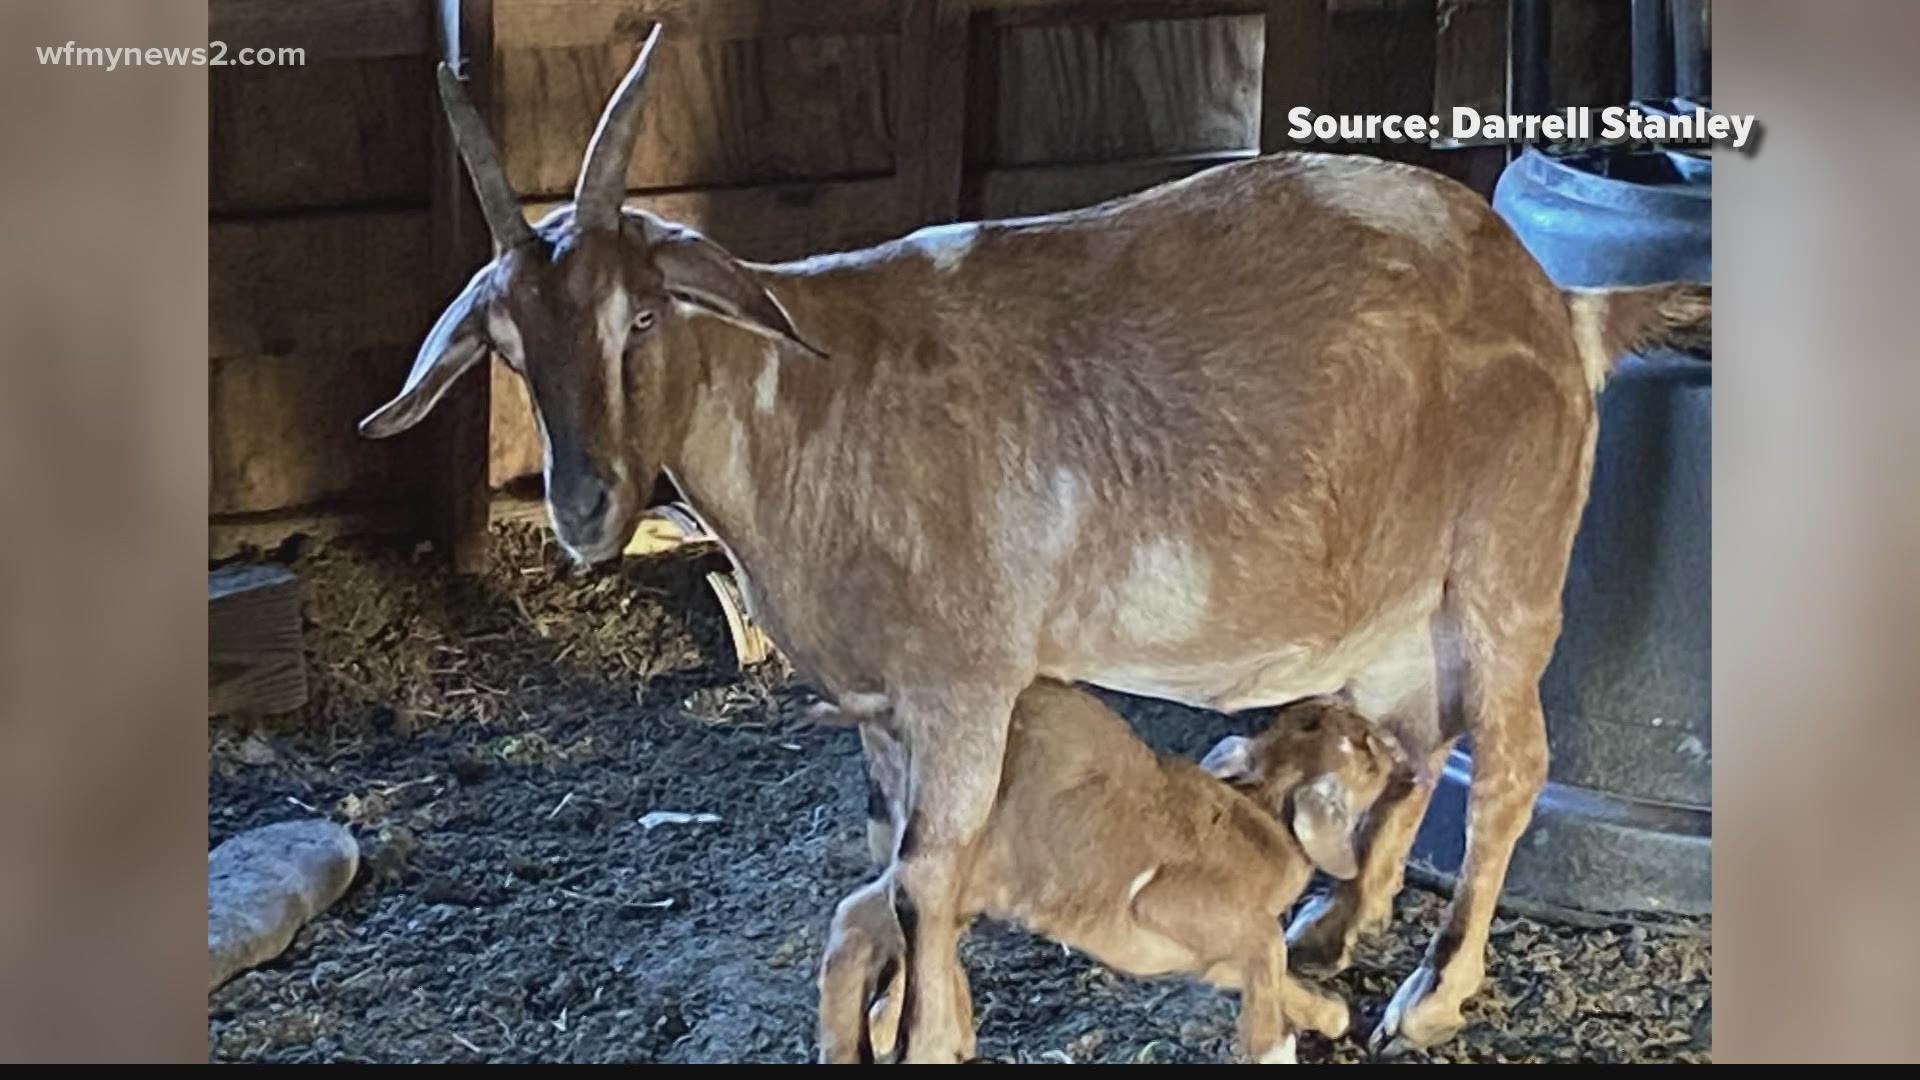 The Sheriff's Office said someone shot and killed 11 goats on a Ramseur man's farm. The owner said many were babies.